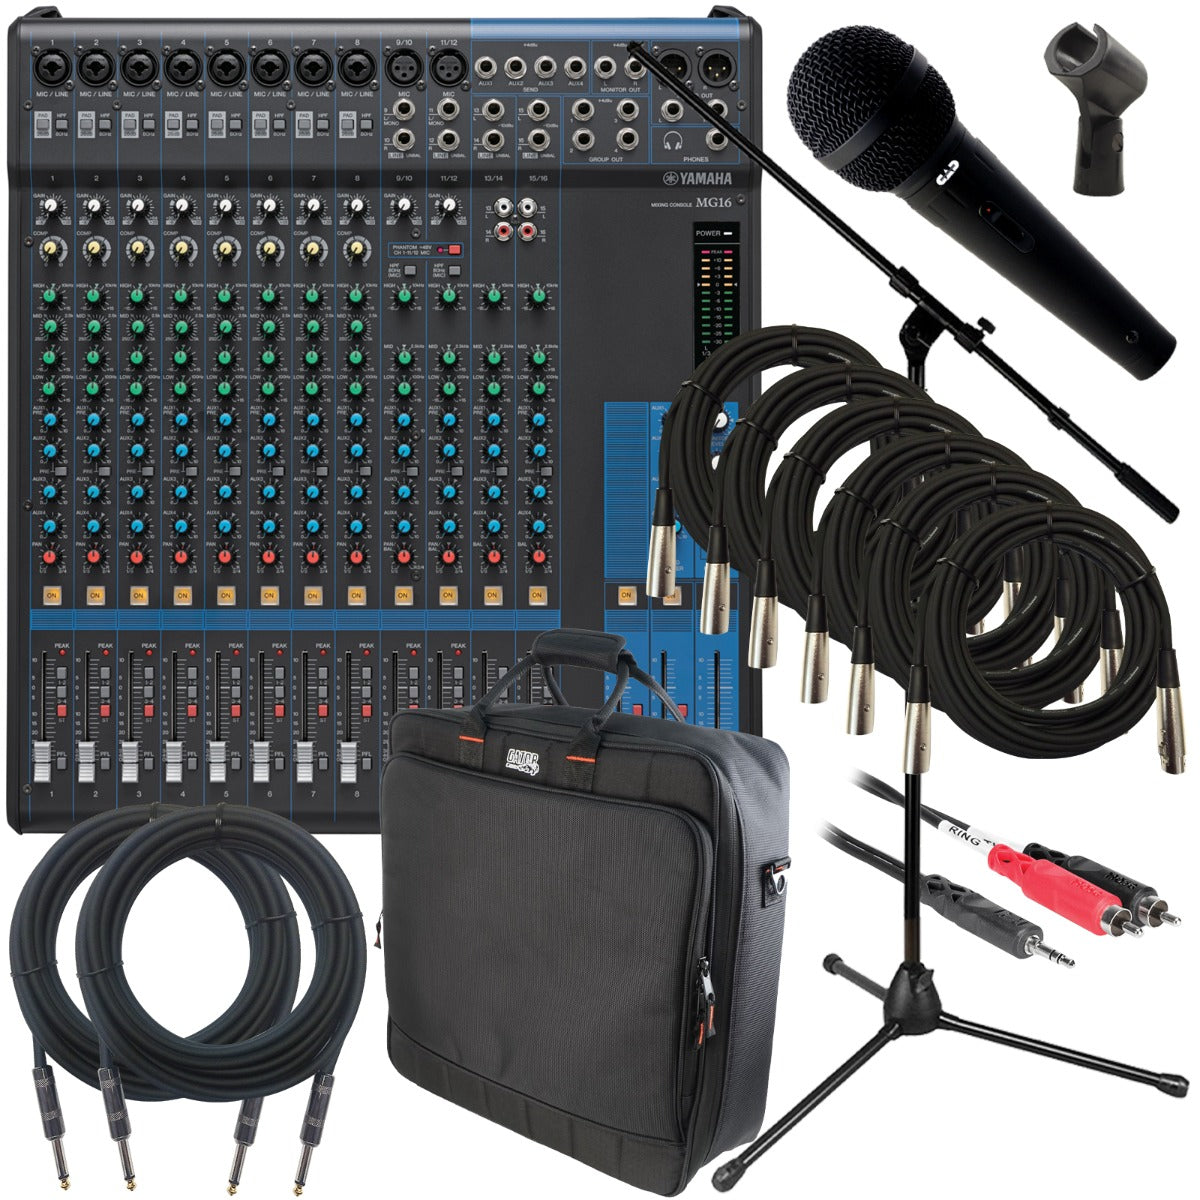 Collage of the components in the Yamaha MG16 16-Channel Stereo Mixer PERFORMER PAK bundle